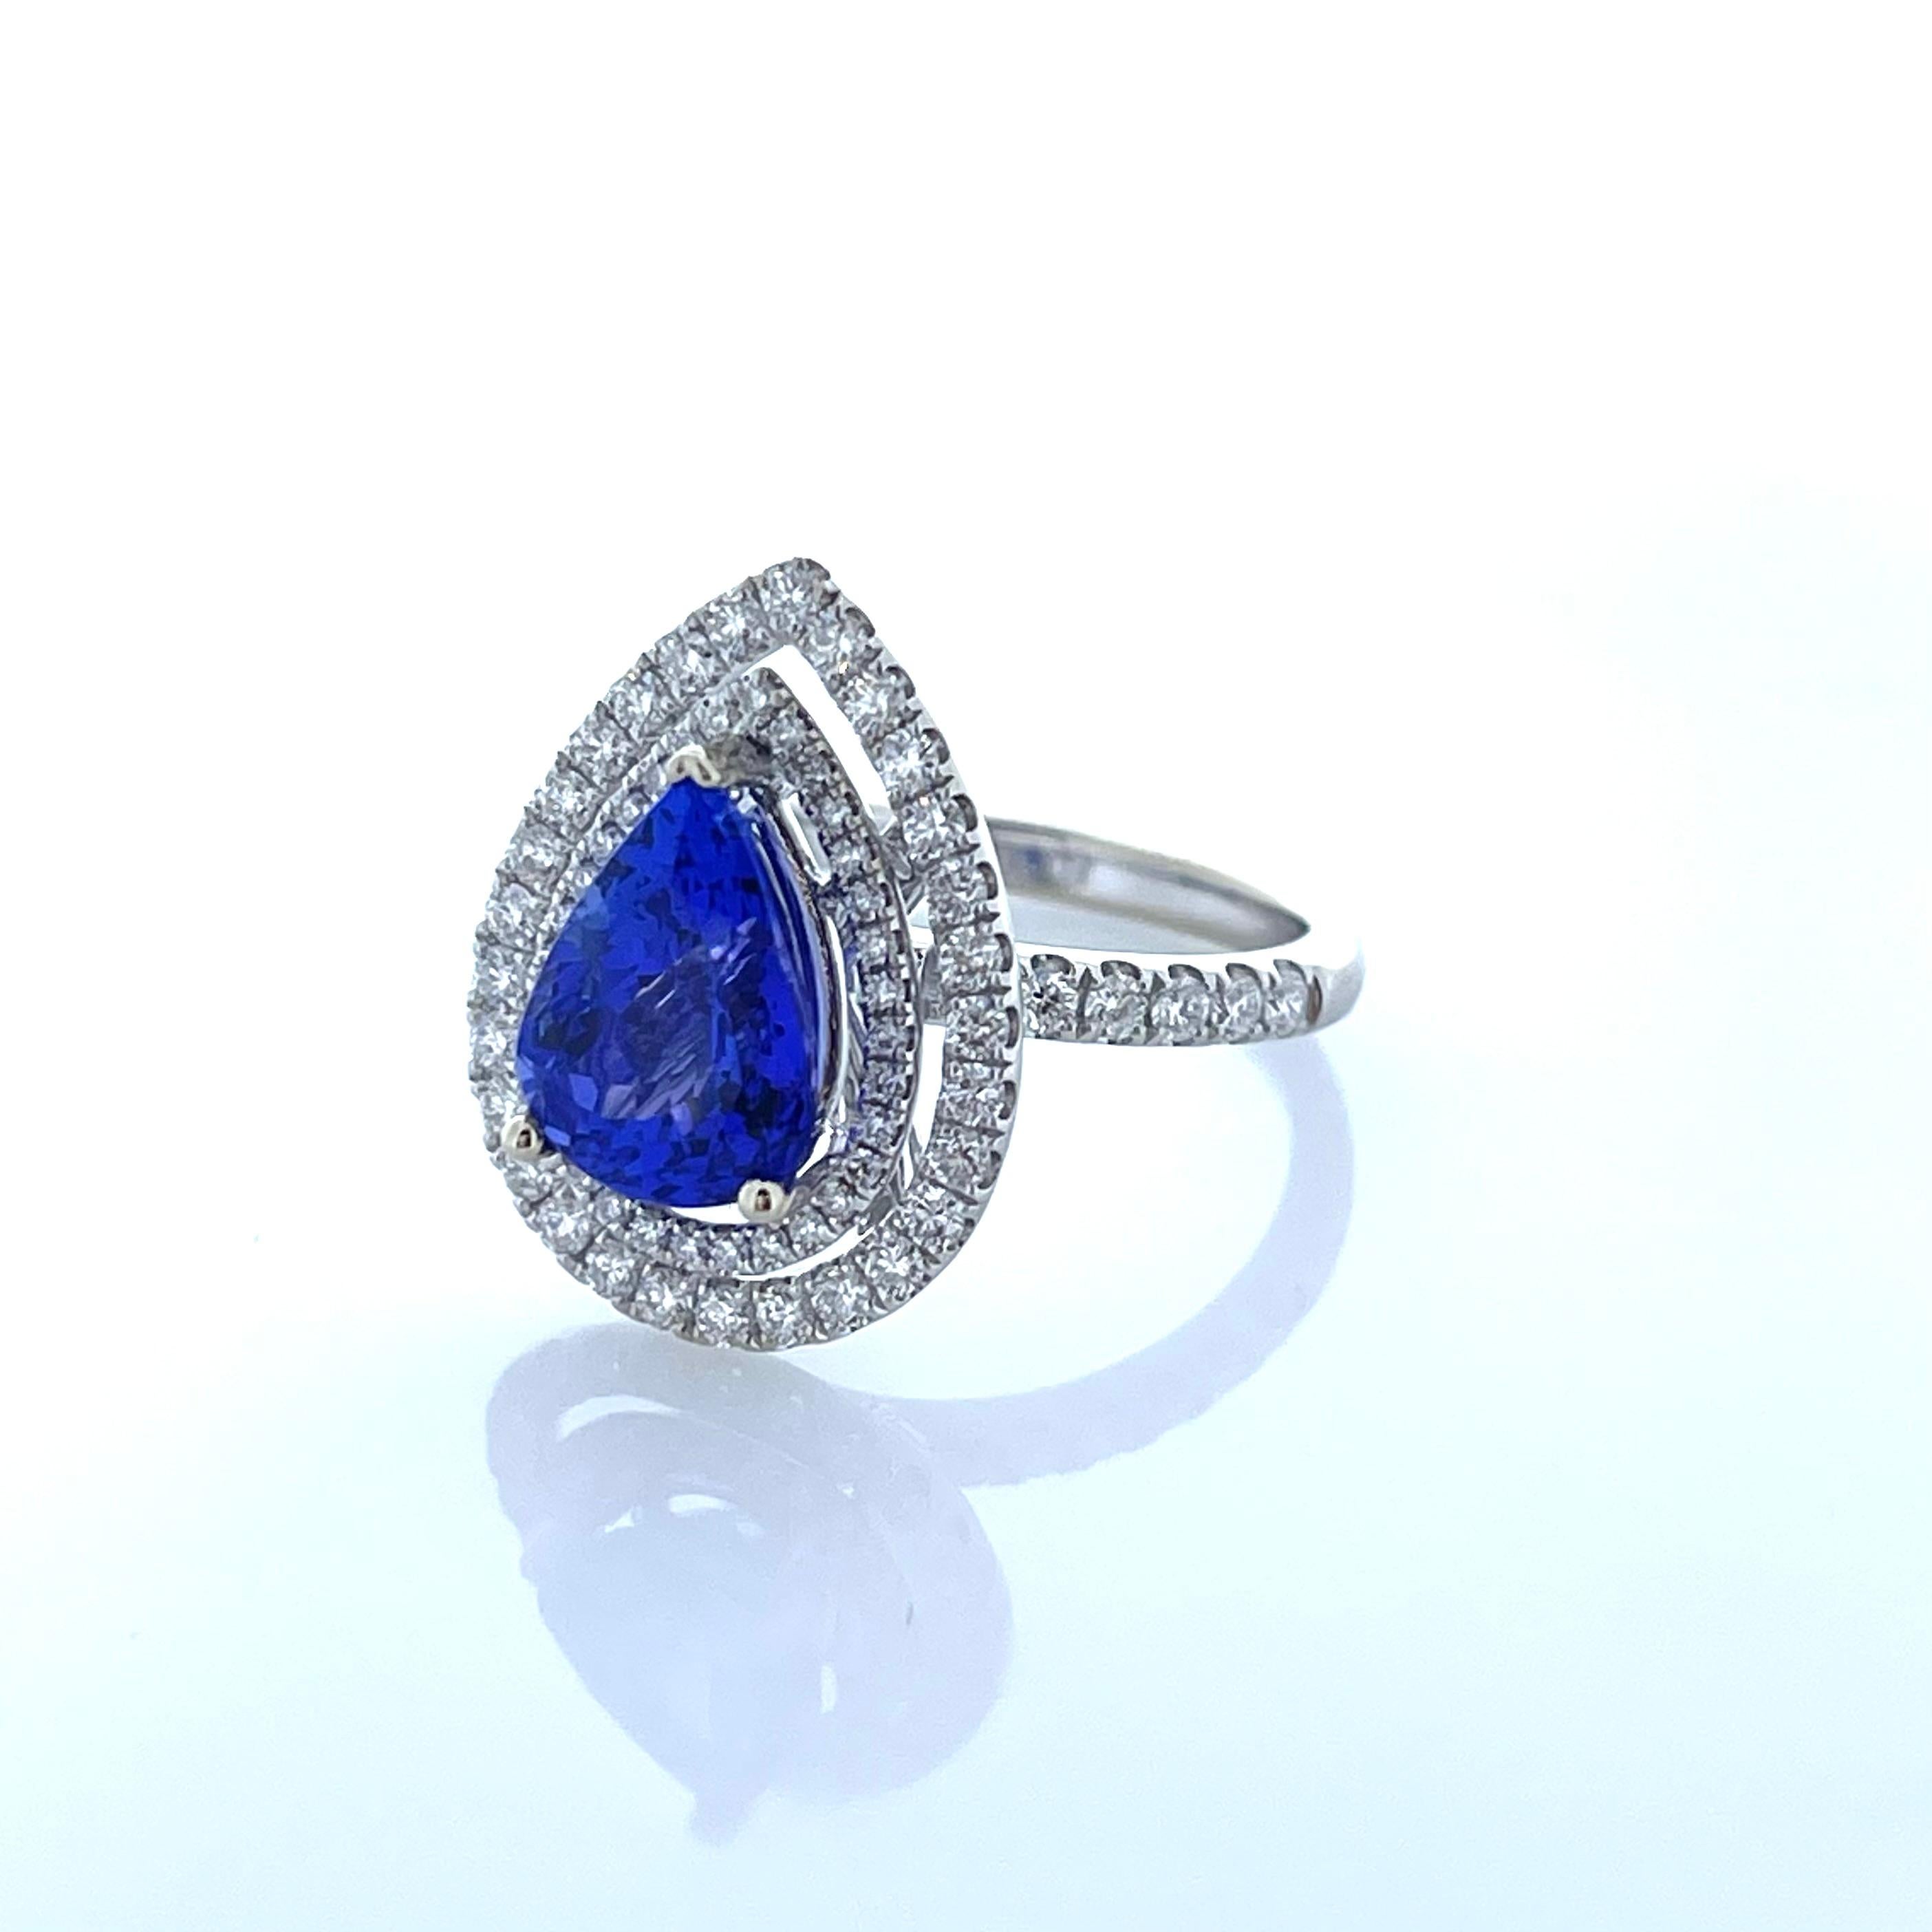 A gorgeous intense Bluish violet sugar loaf tanzanite is prong set in the center with a weight of 2.89 carats. This spectacular 18 karat white gold custom made ring truly displays the incredible beauty of the Pear shaped tanzanite. The 1.14 carat